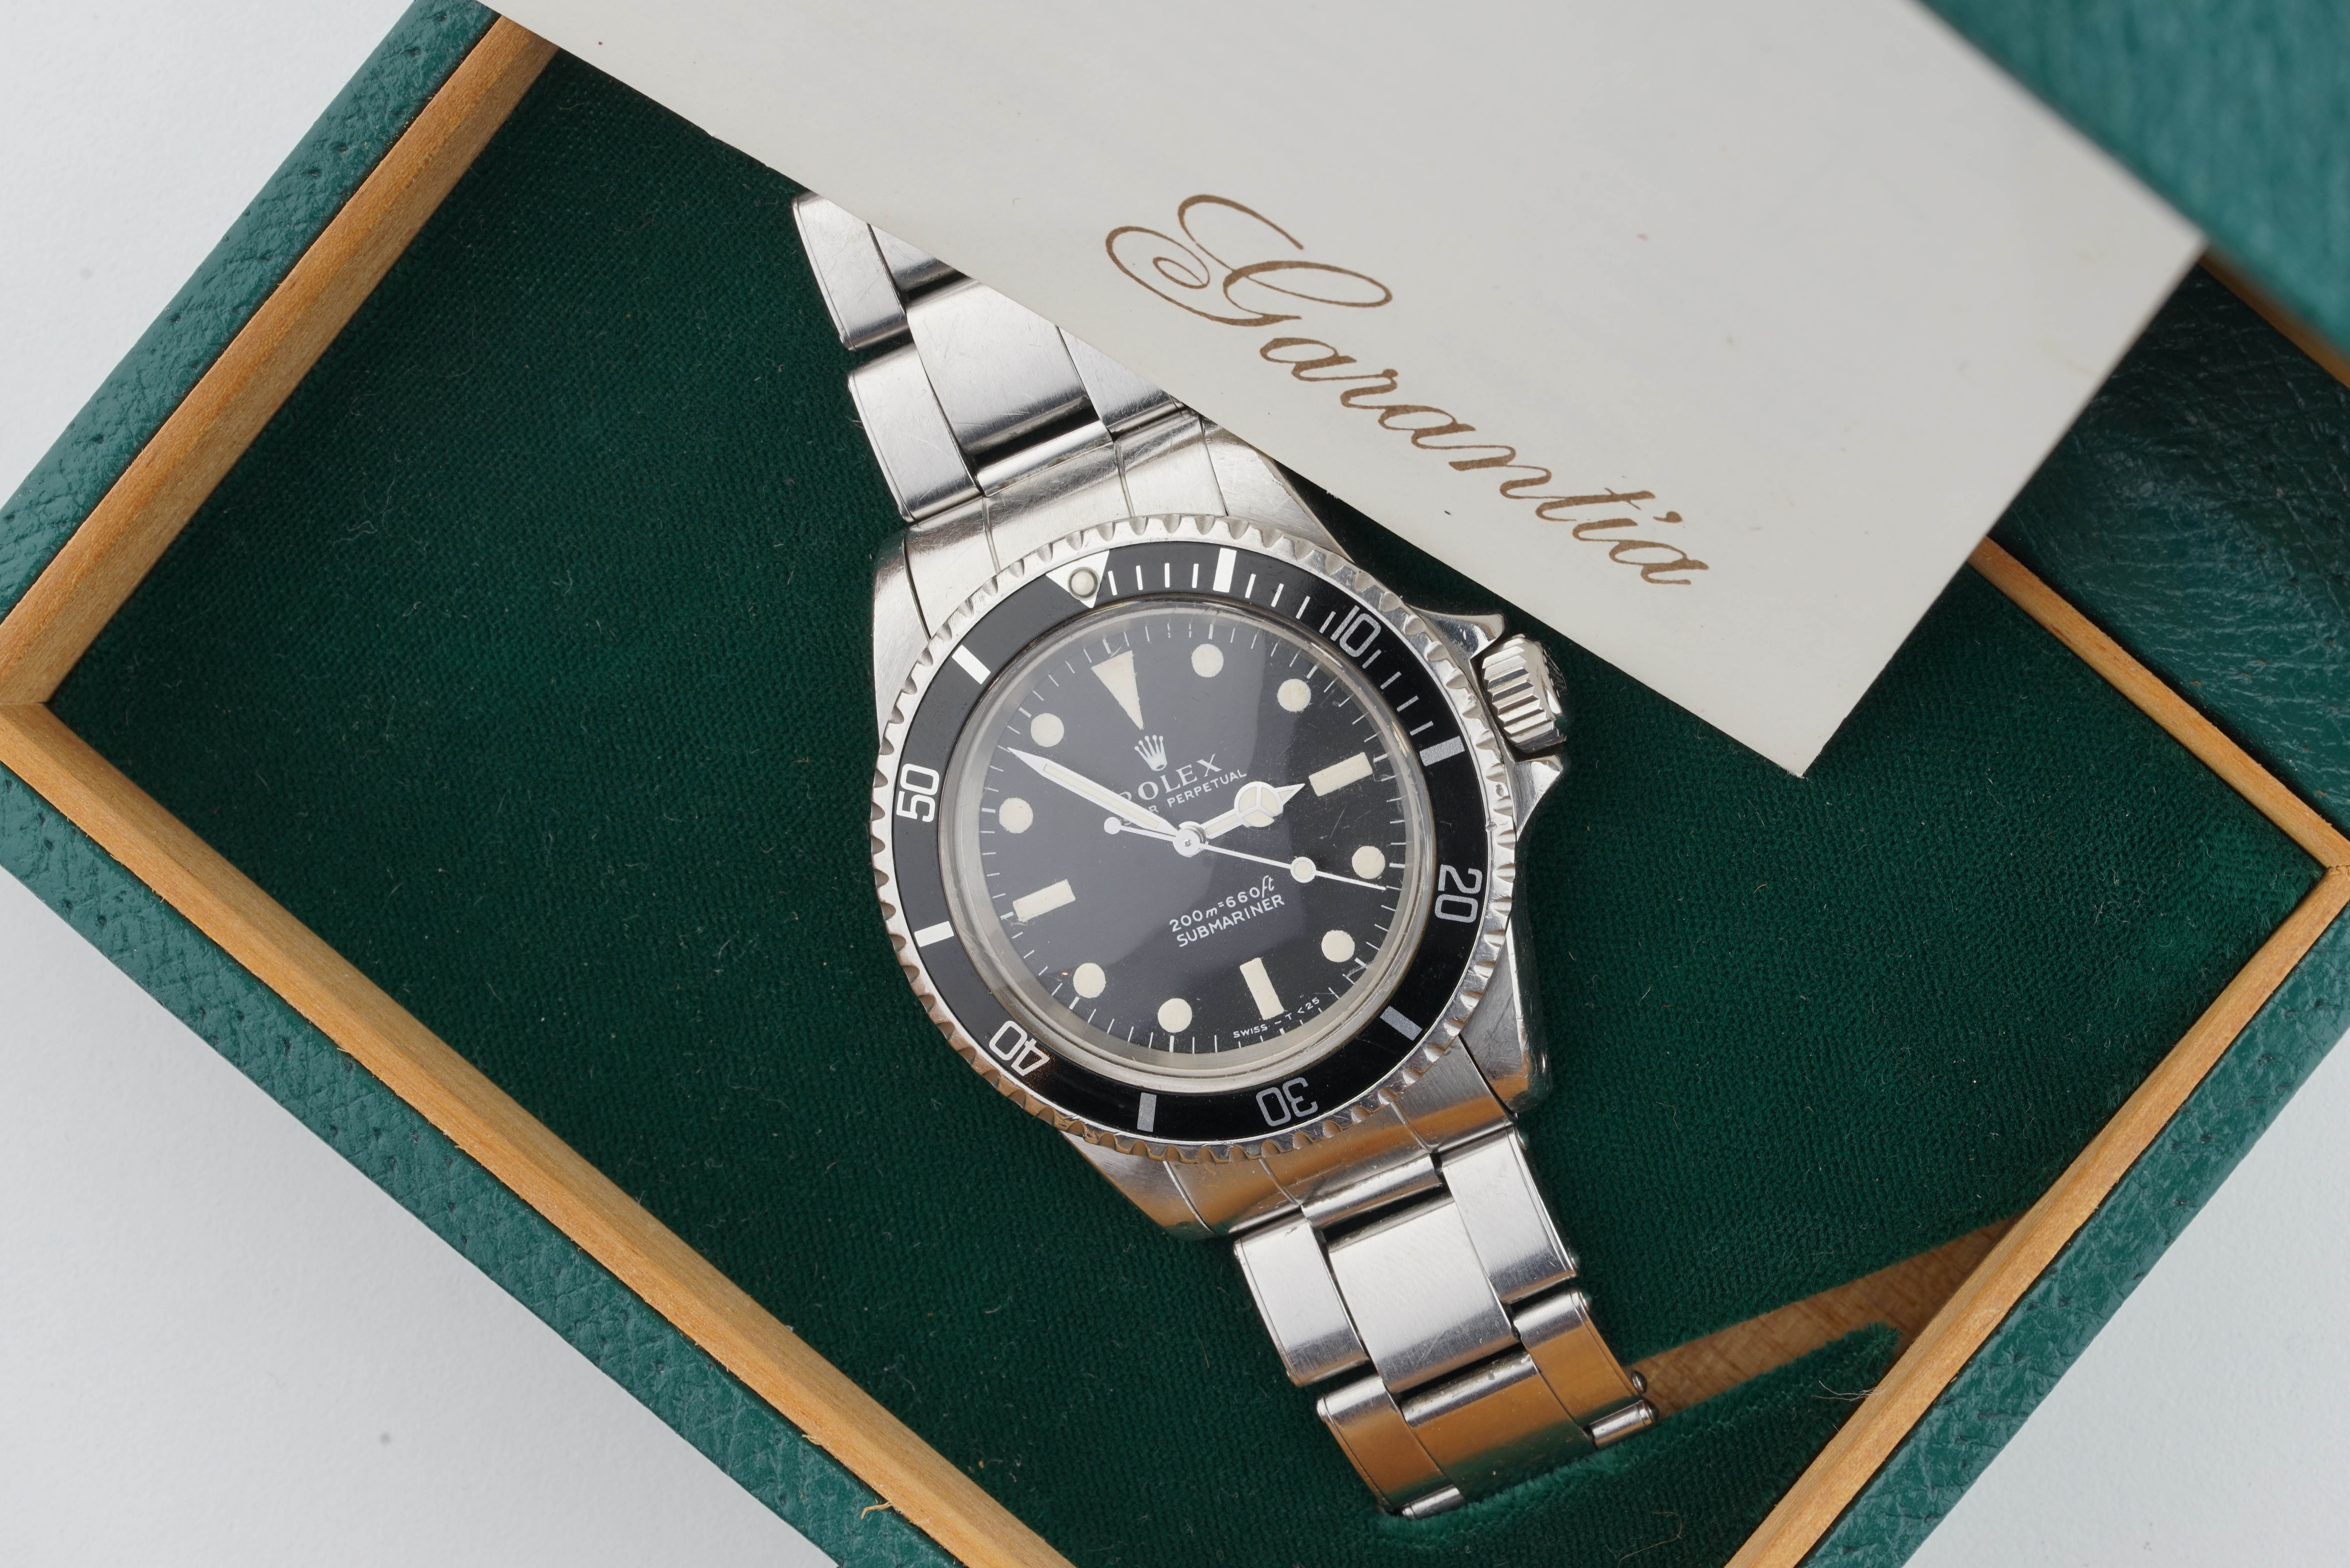 ROLEX OYSTER PERPETUAL SUBMARINER METERS FIRST DIAL 7206 RIVETED BRACELET W/ BOX & PAPERS REF. - Image 2 of 11